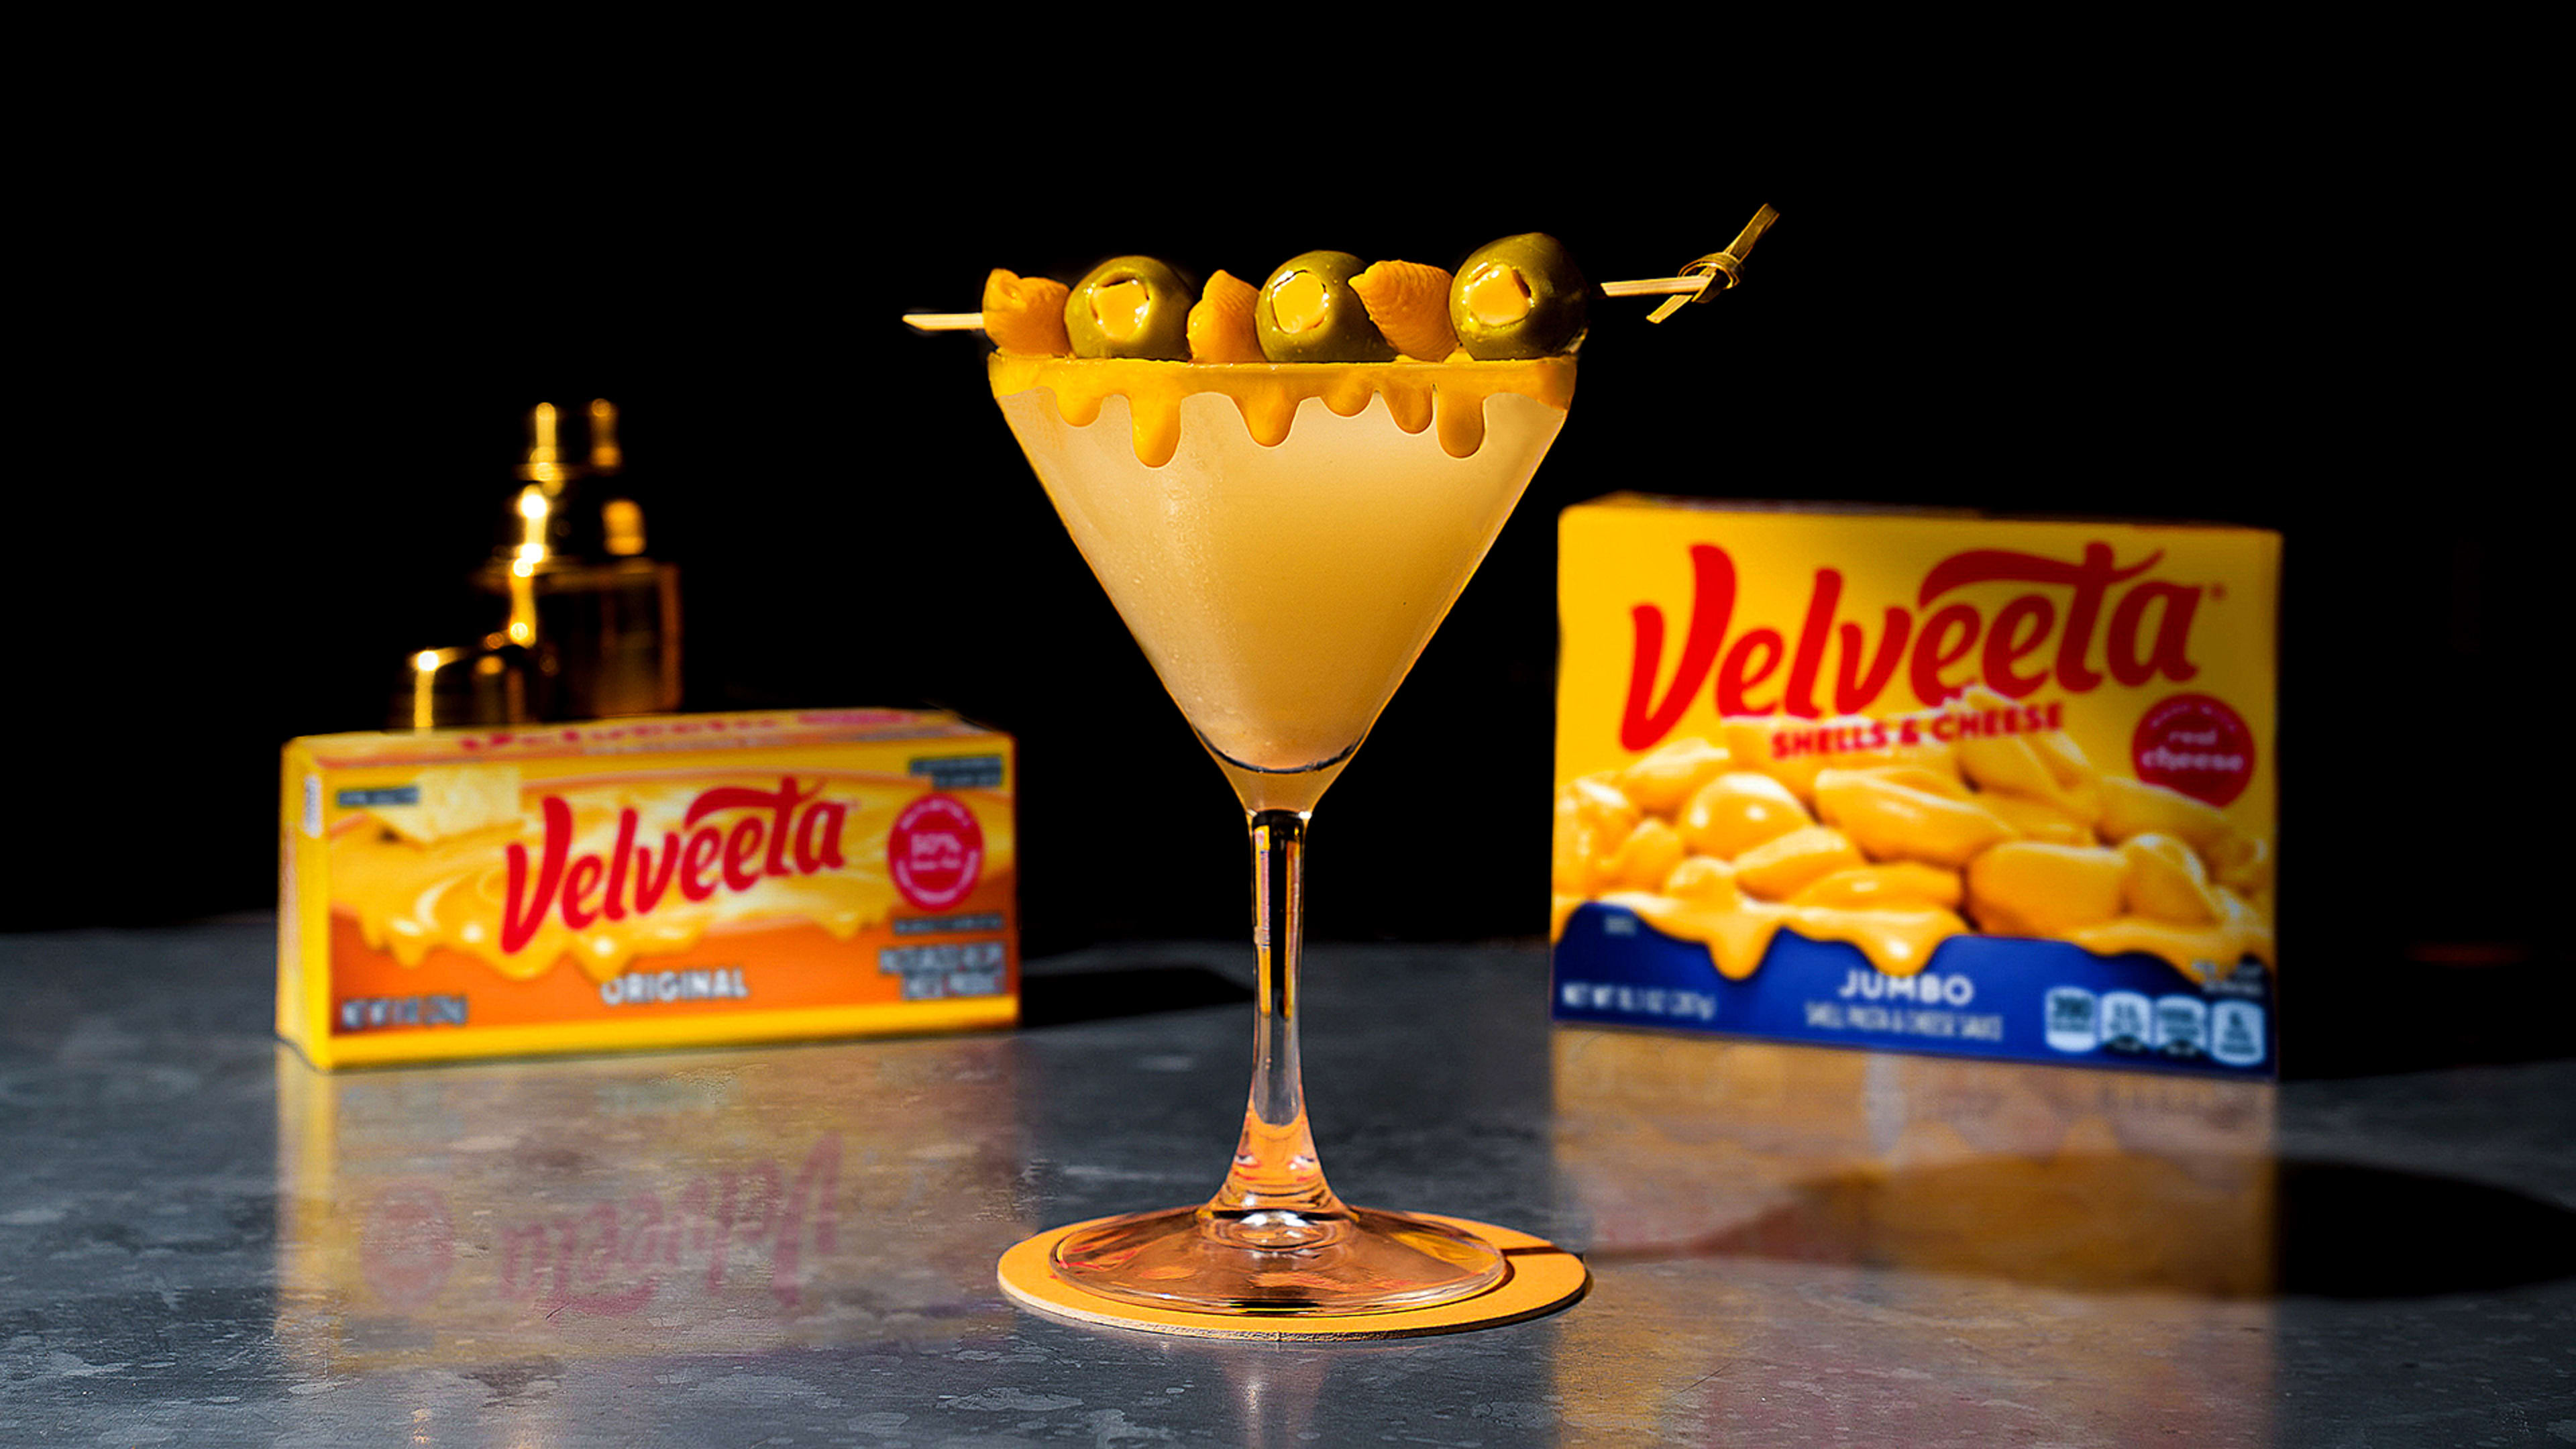 Velveeta’s quirky marketing collabs seek to shake up a 100-year-old brand